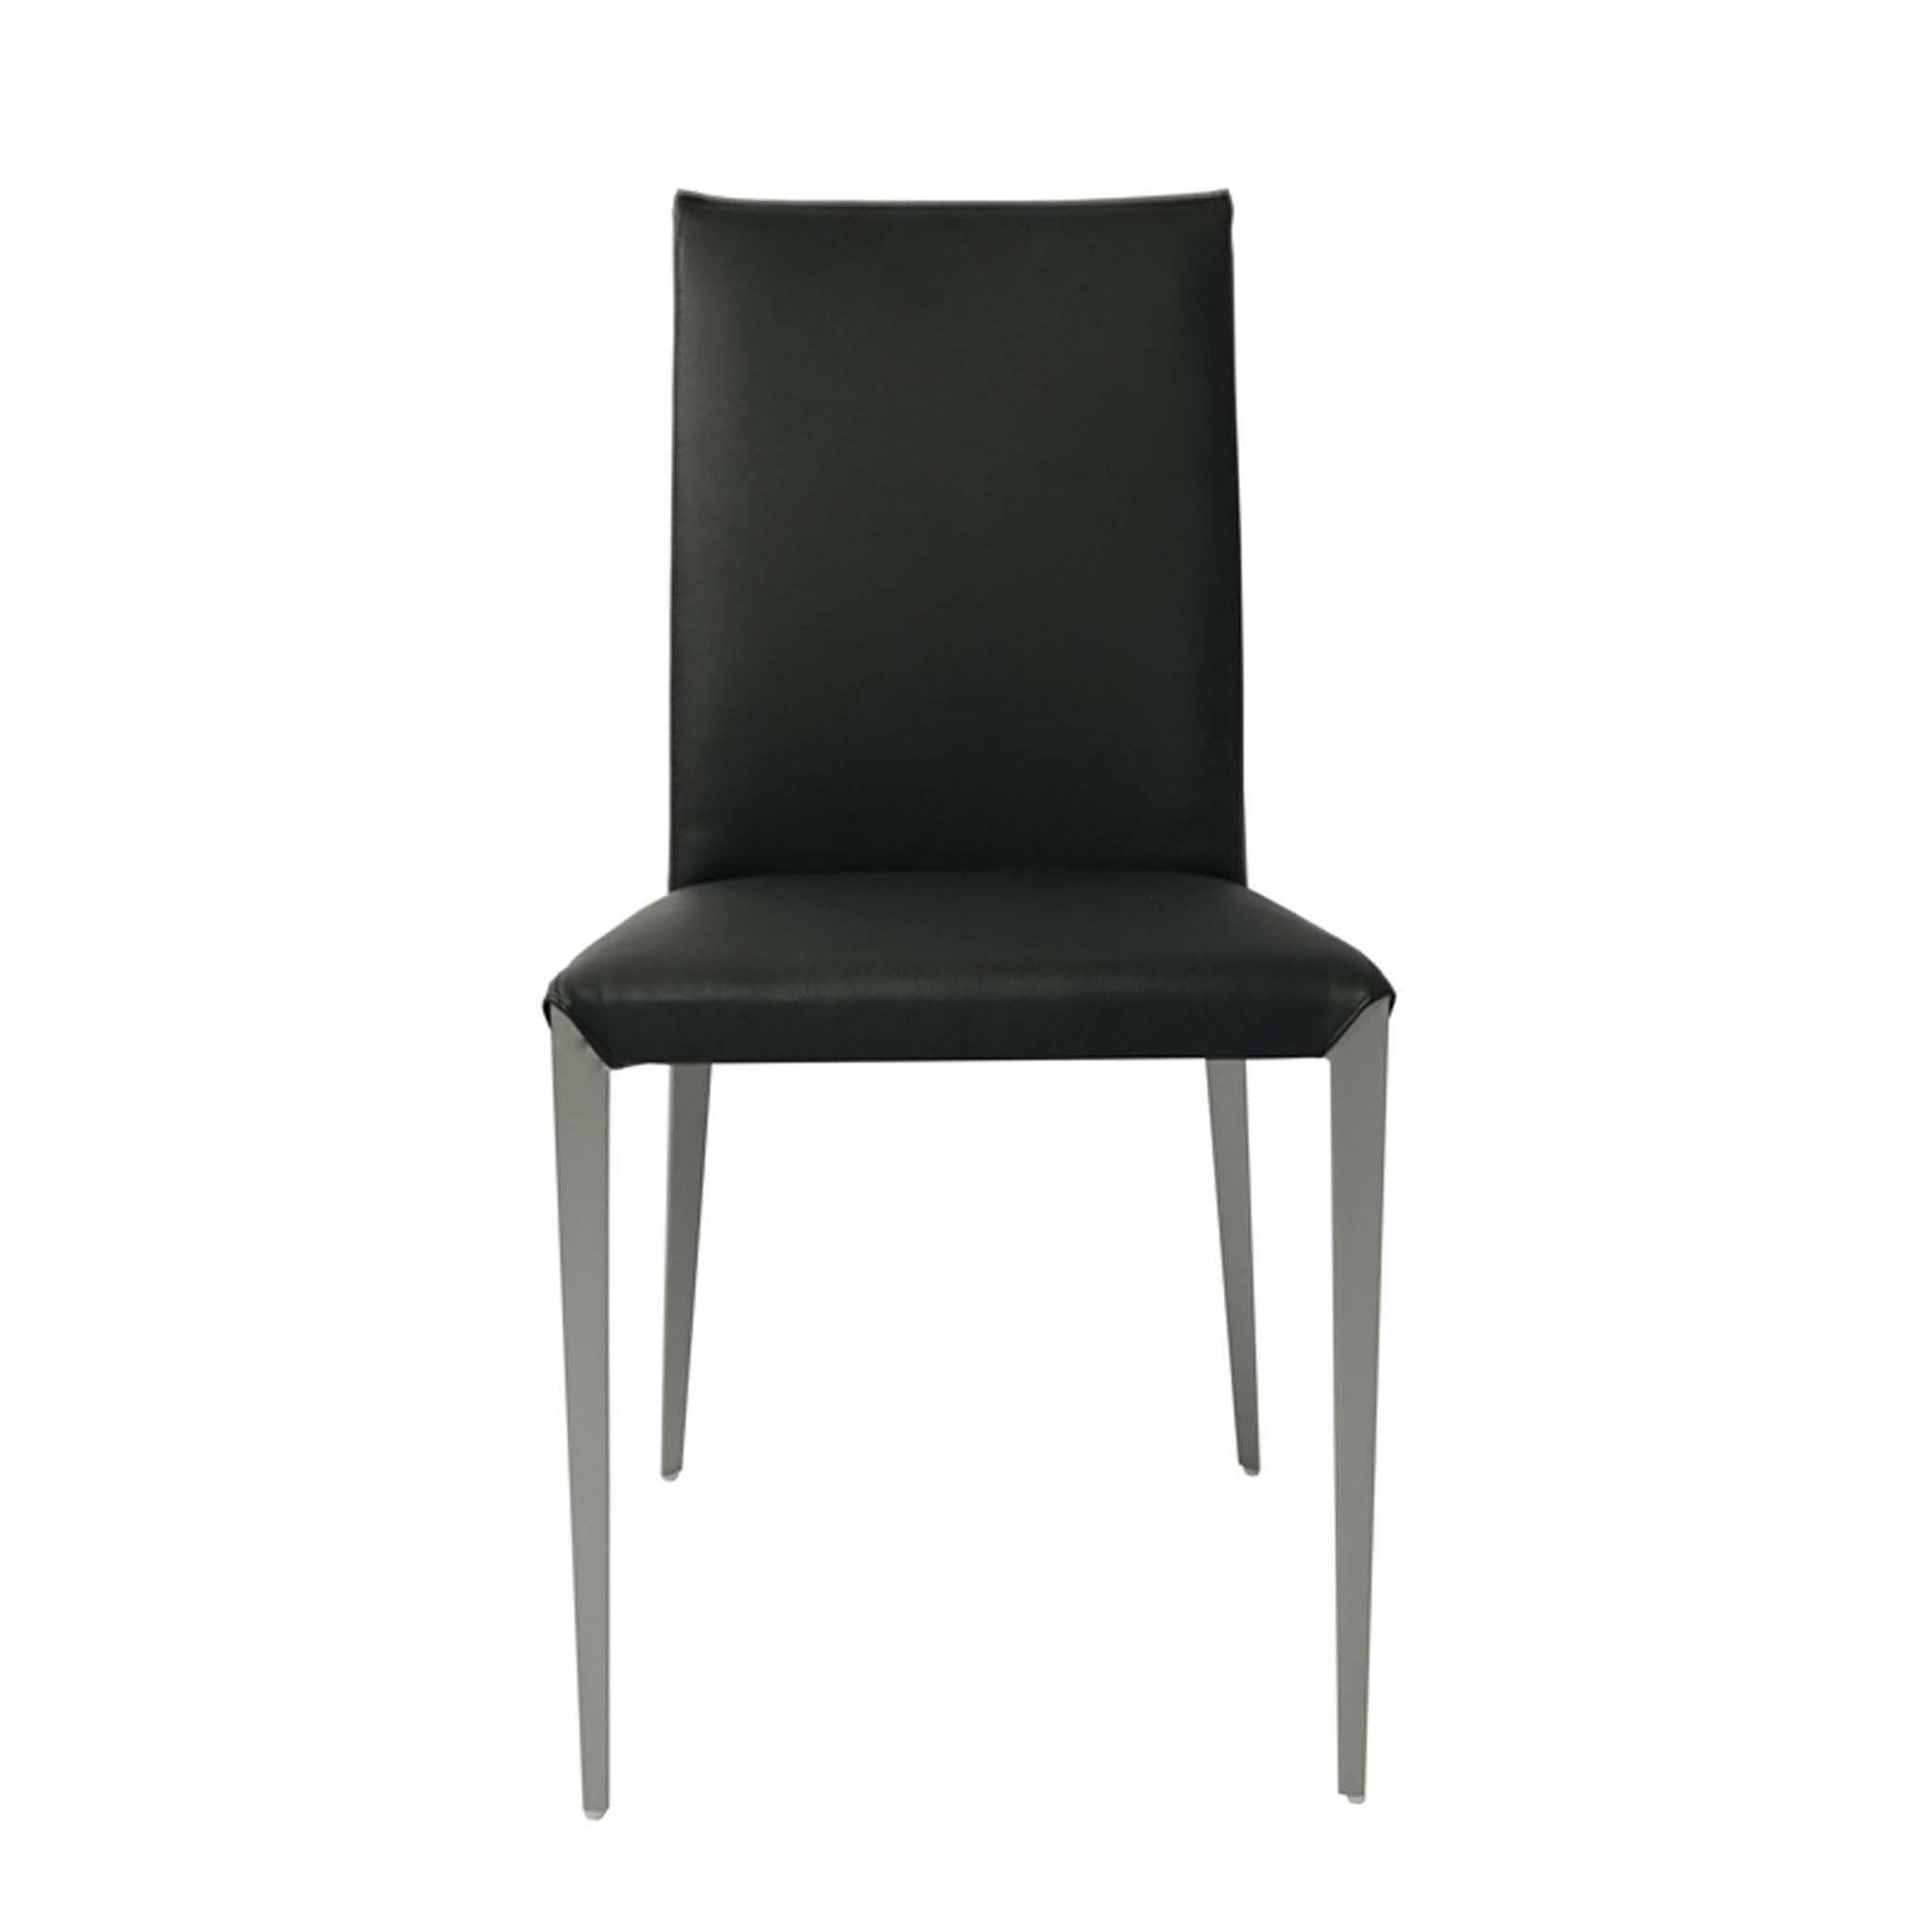 Bellini-Air Dining Chairs-Dining Chairs-MODTEMPO